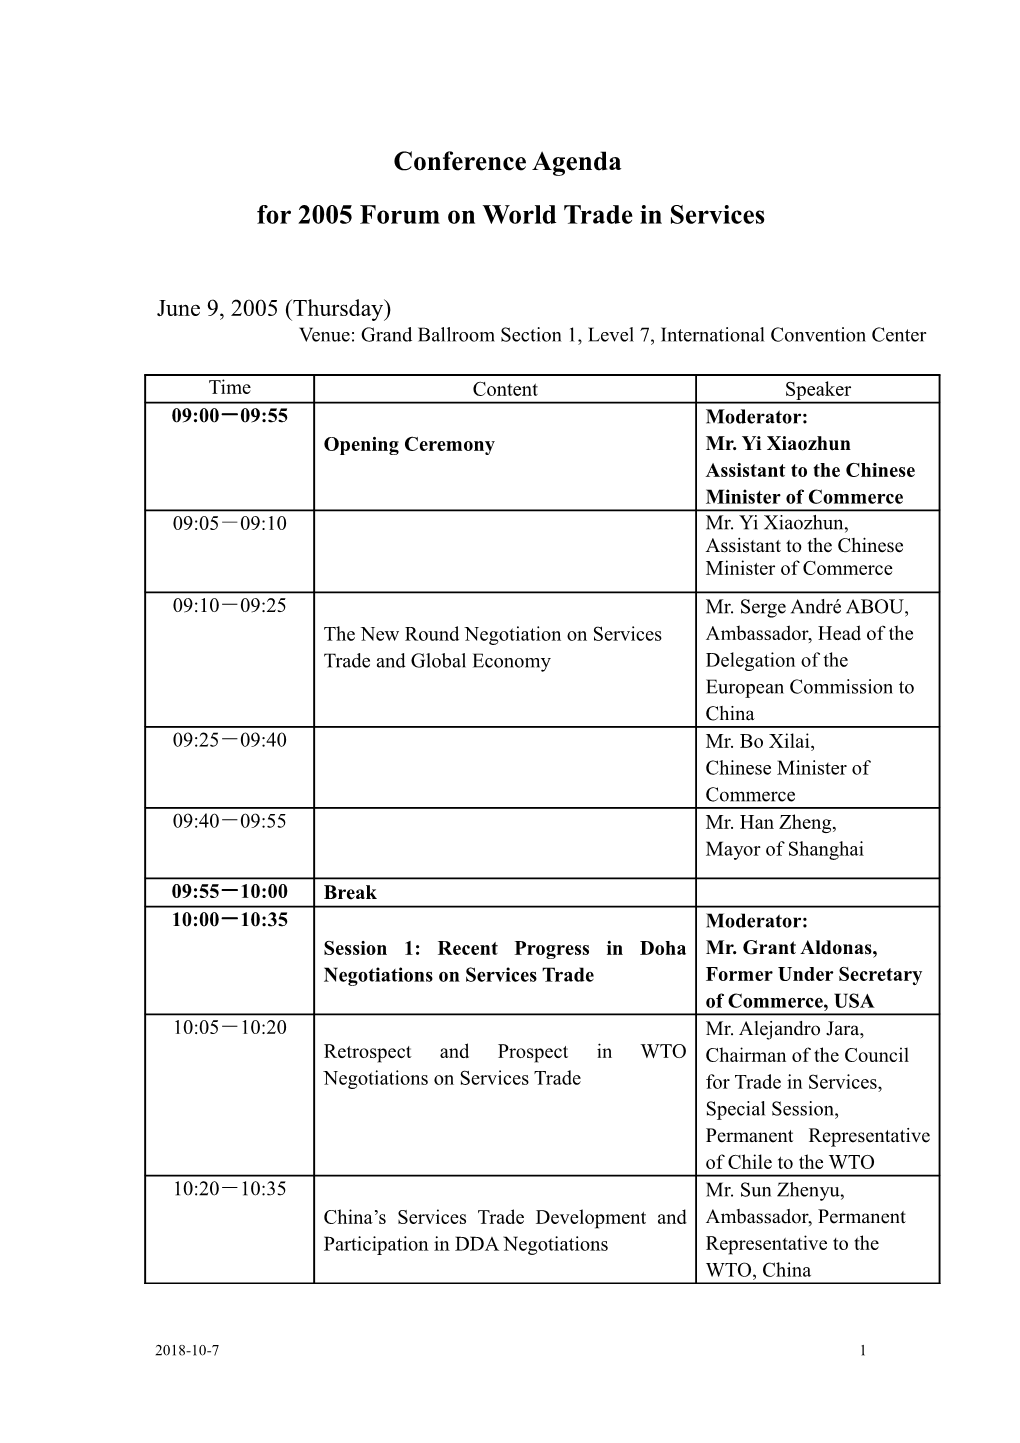 Agenda for 2005 Forum on World Trade in Services